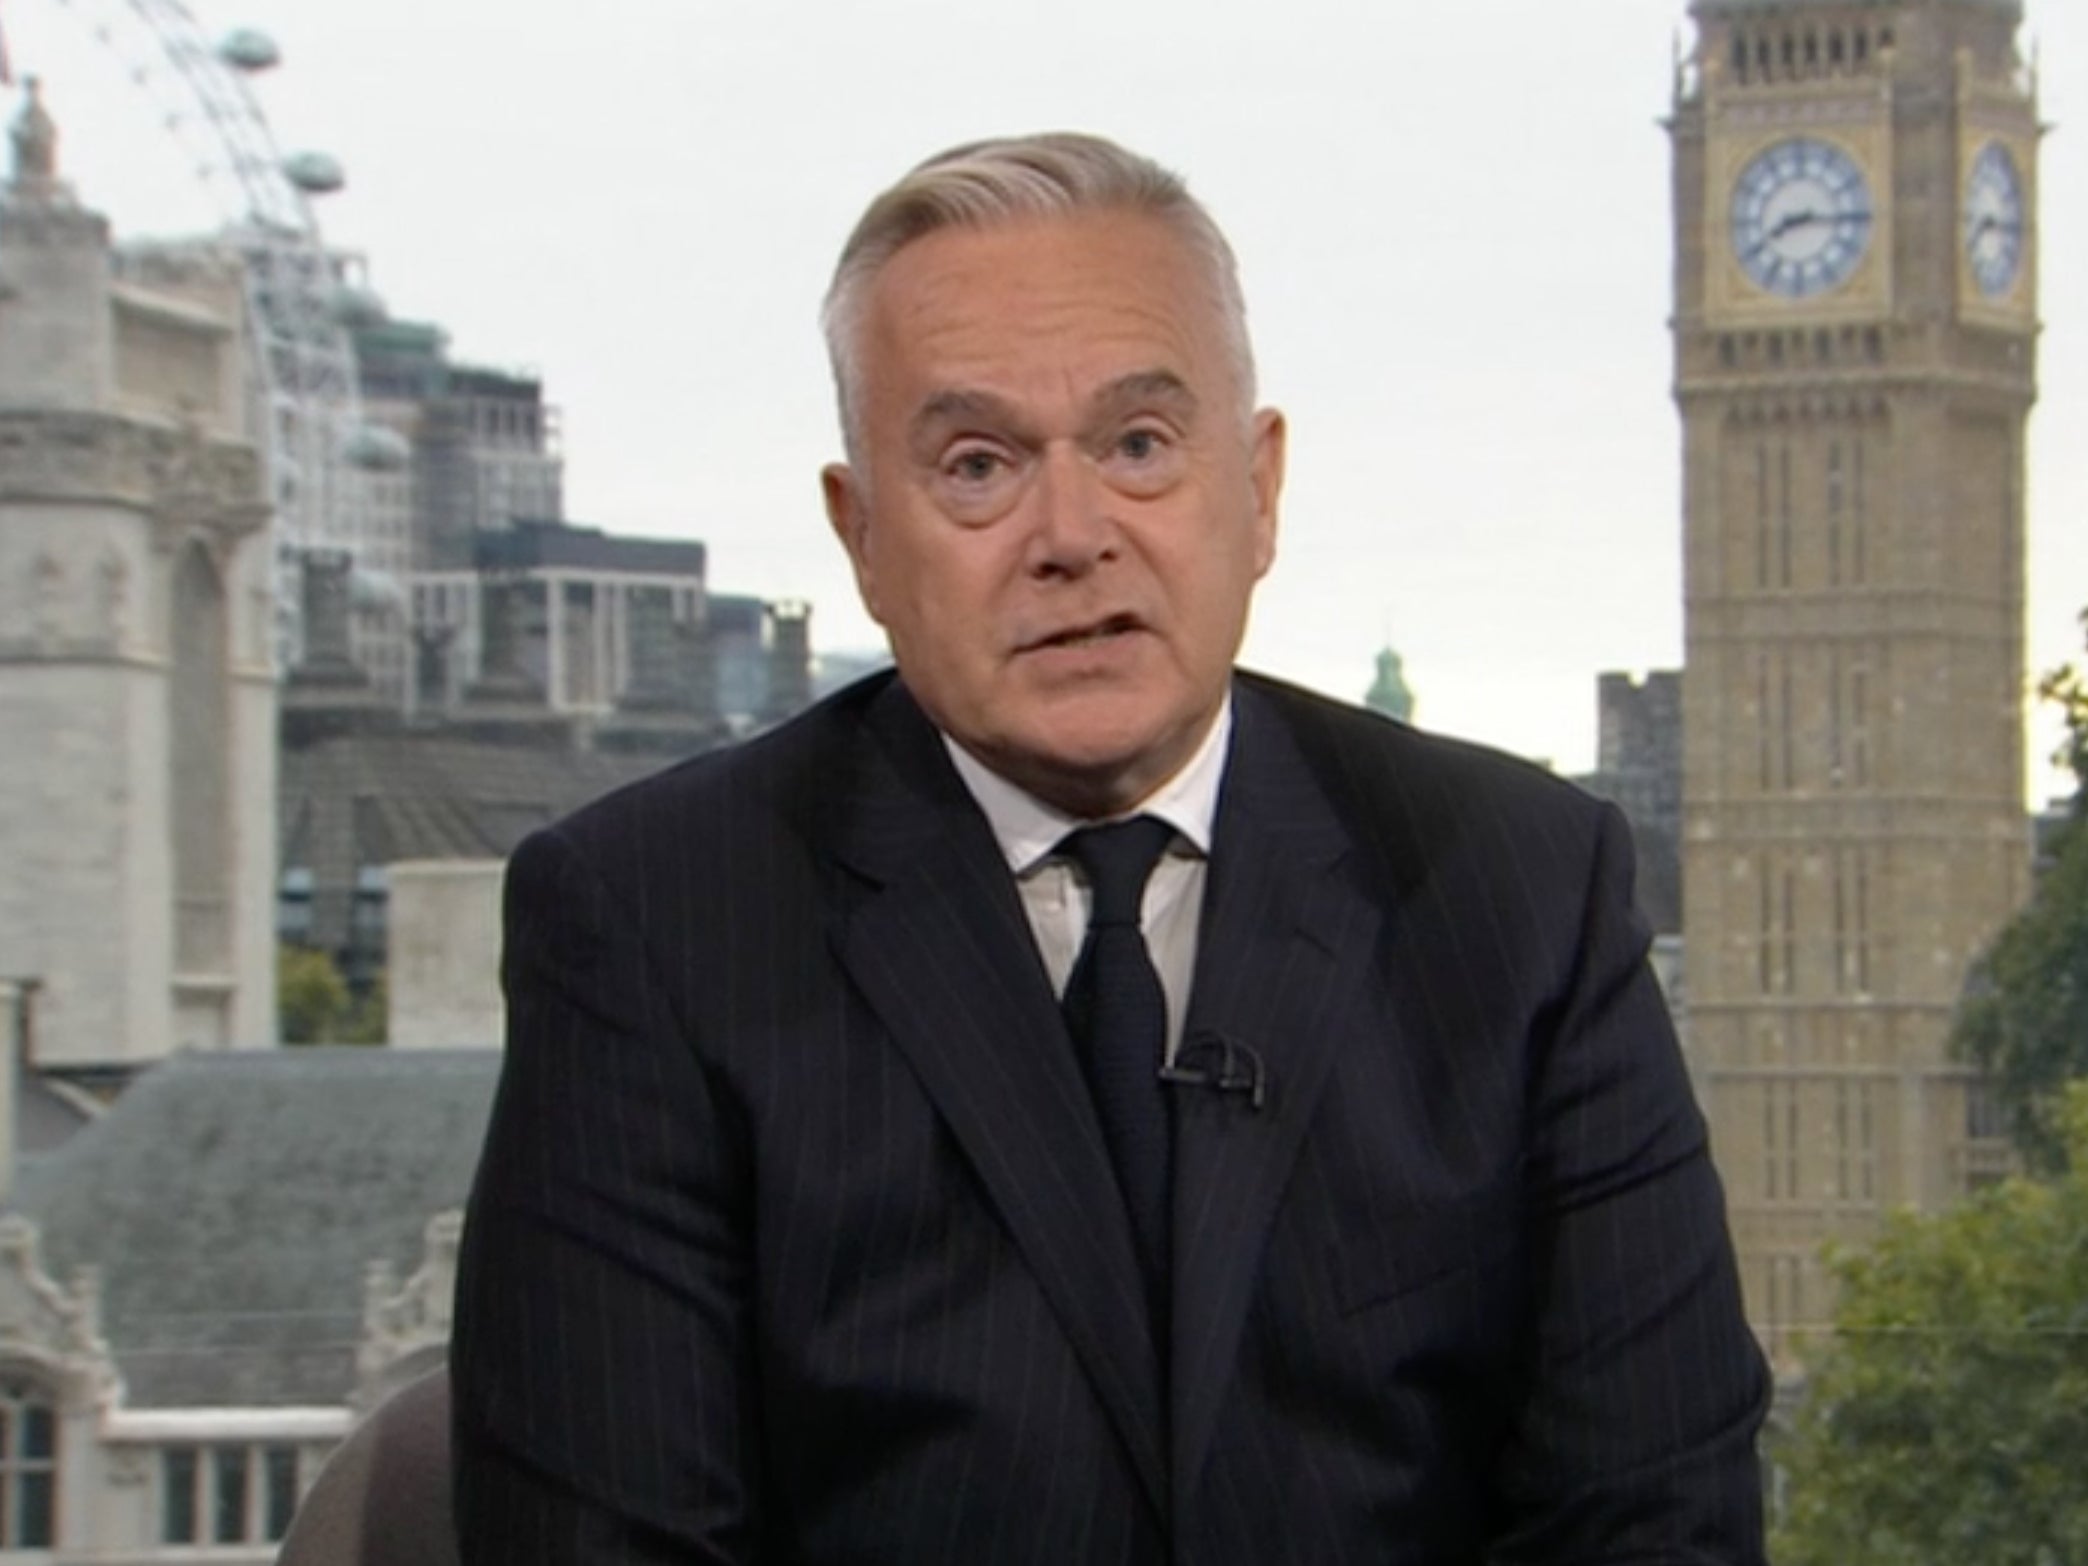 Huw Edwards during the BBC coverage of the Queen’s death